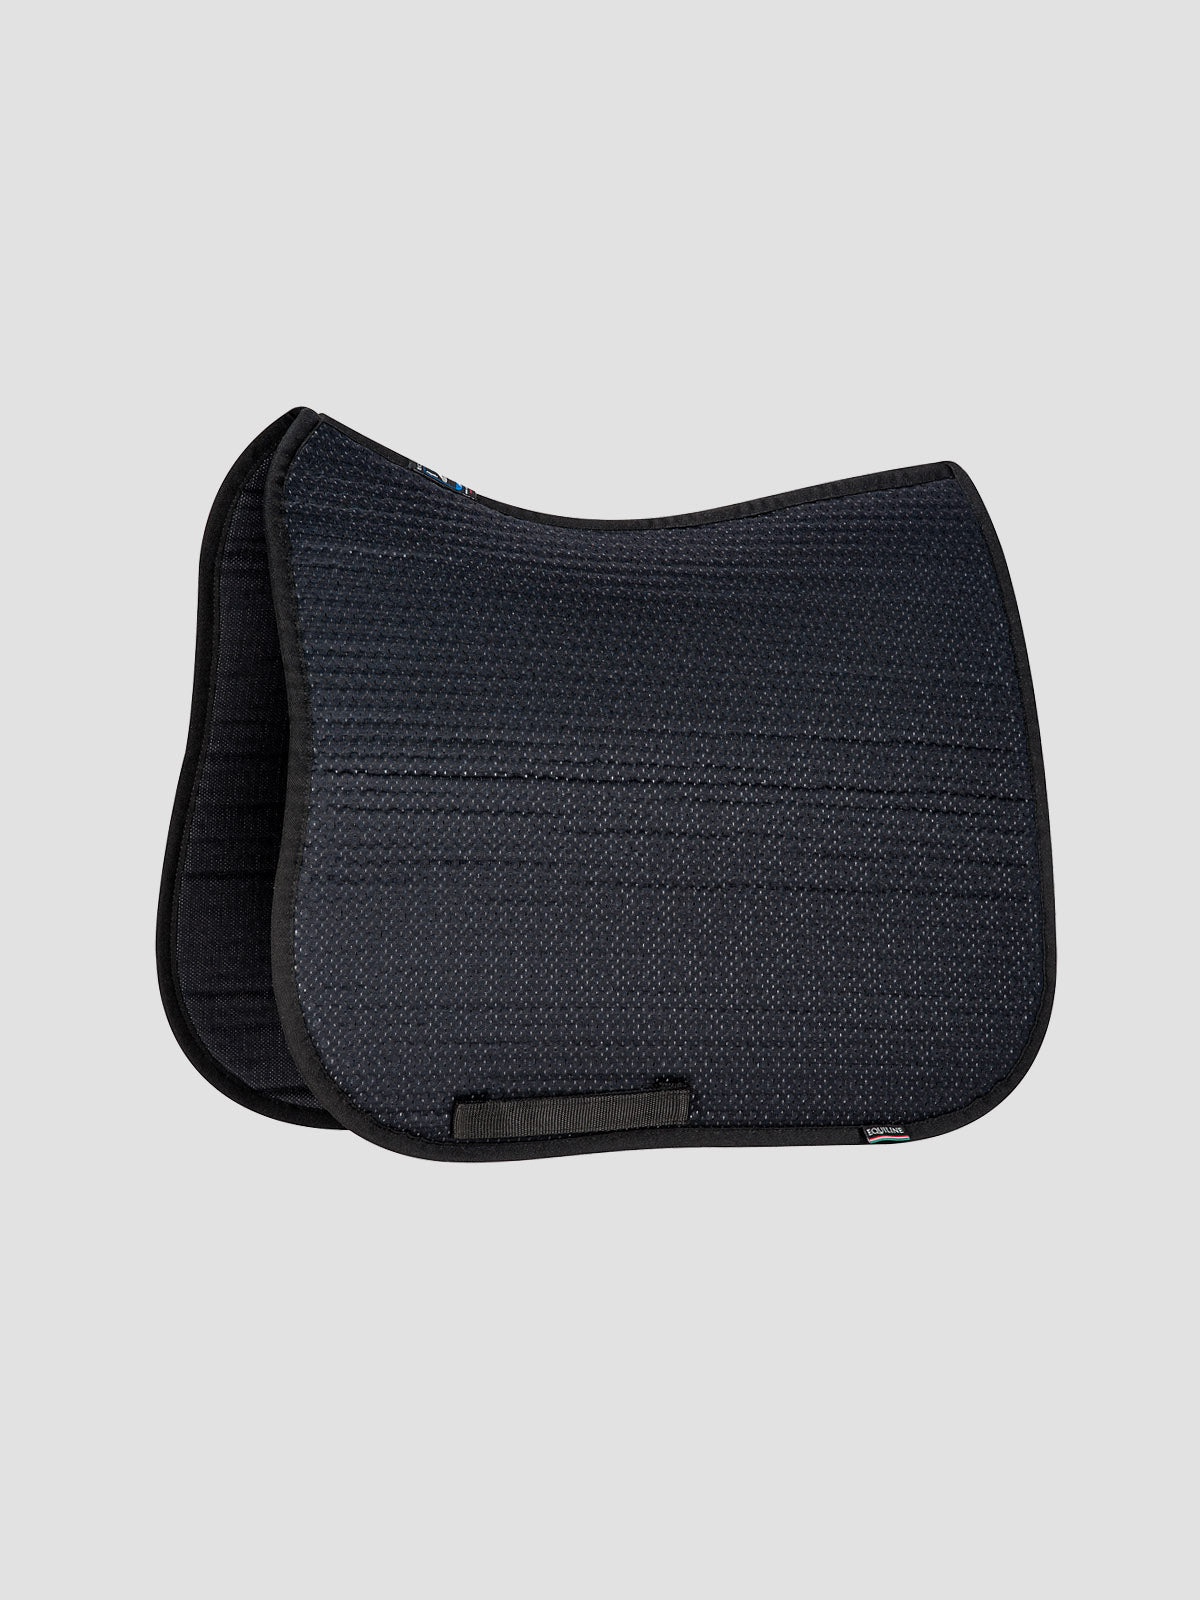 EQUILINE- AIR - TECHNO AIR SHOCK ABSORBER SADDLE PAD